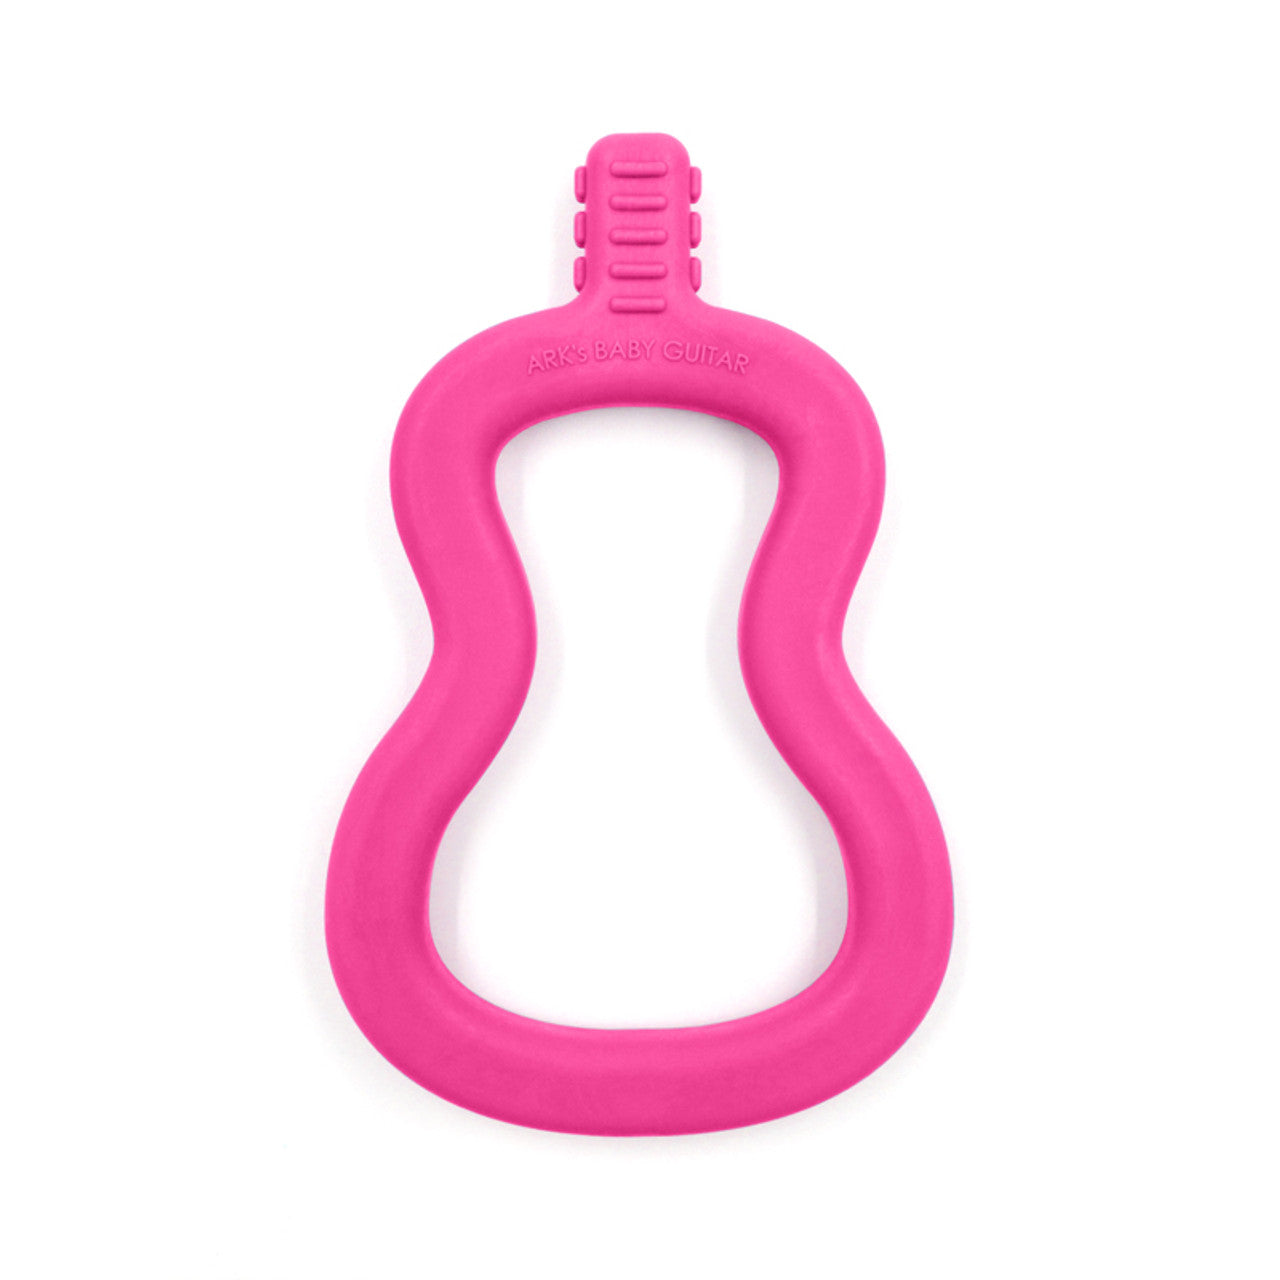 The Hot Pink Baby Guitar Chew.